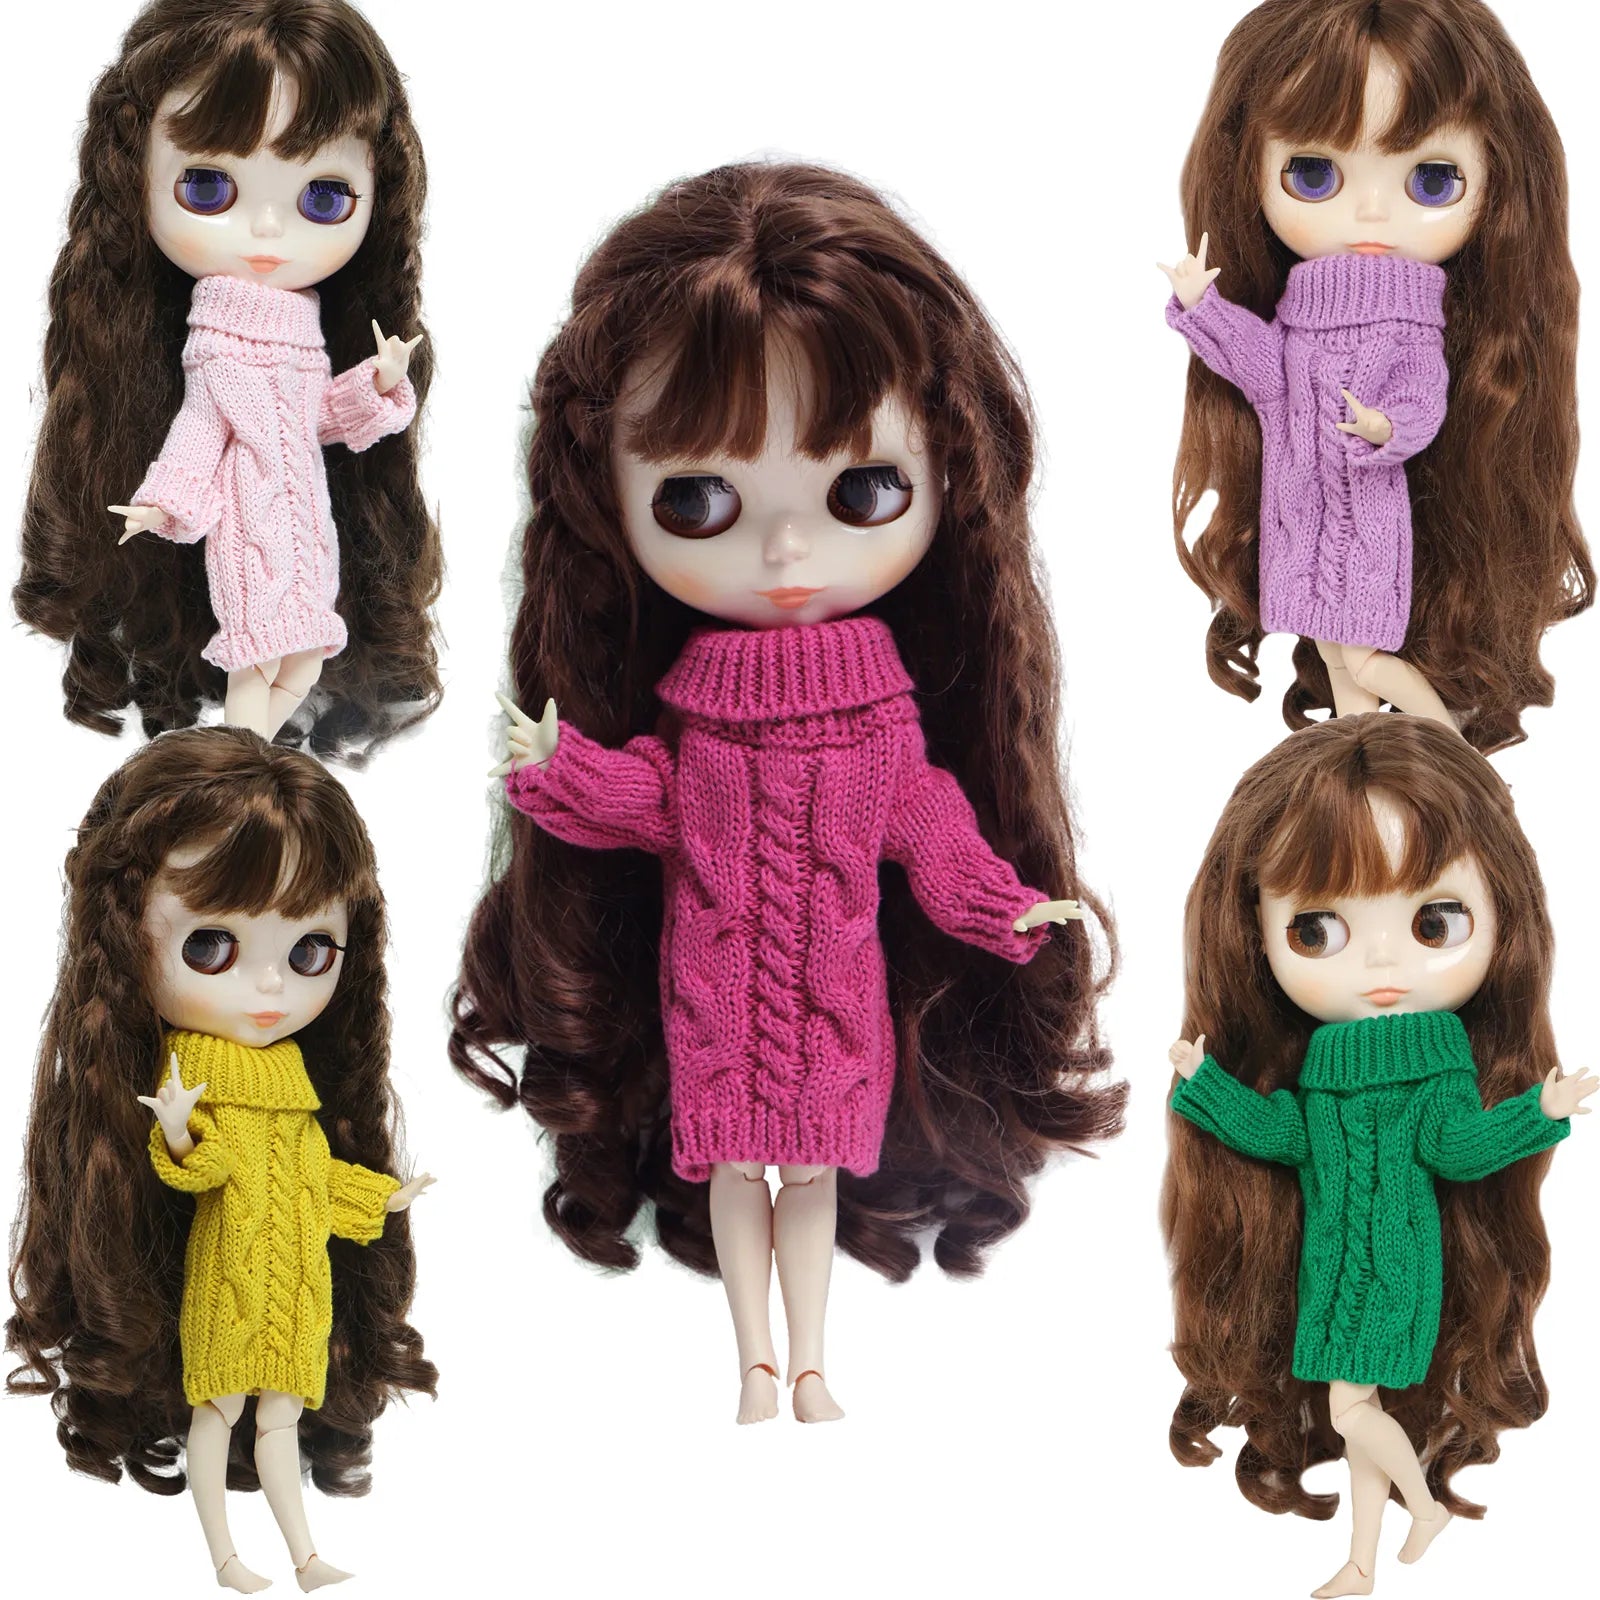 1 Set Doll Winter Knitted Sweater Lovely Dresses Handmade Clothes for Blythe Doll 11.5 Inch Toy